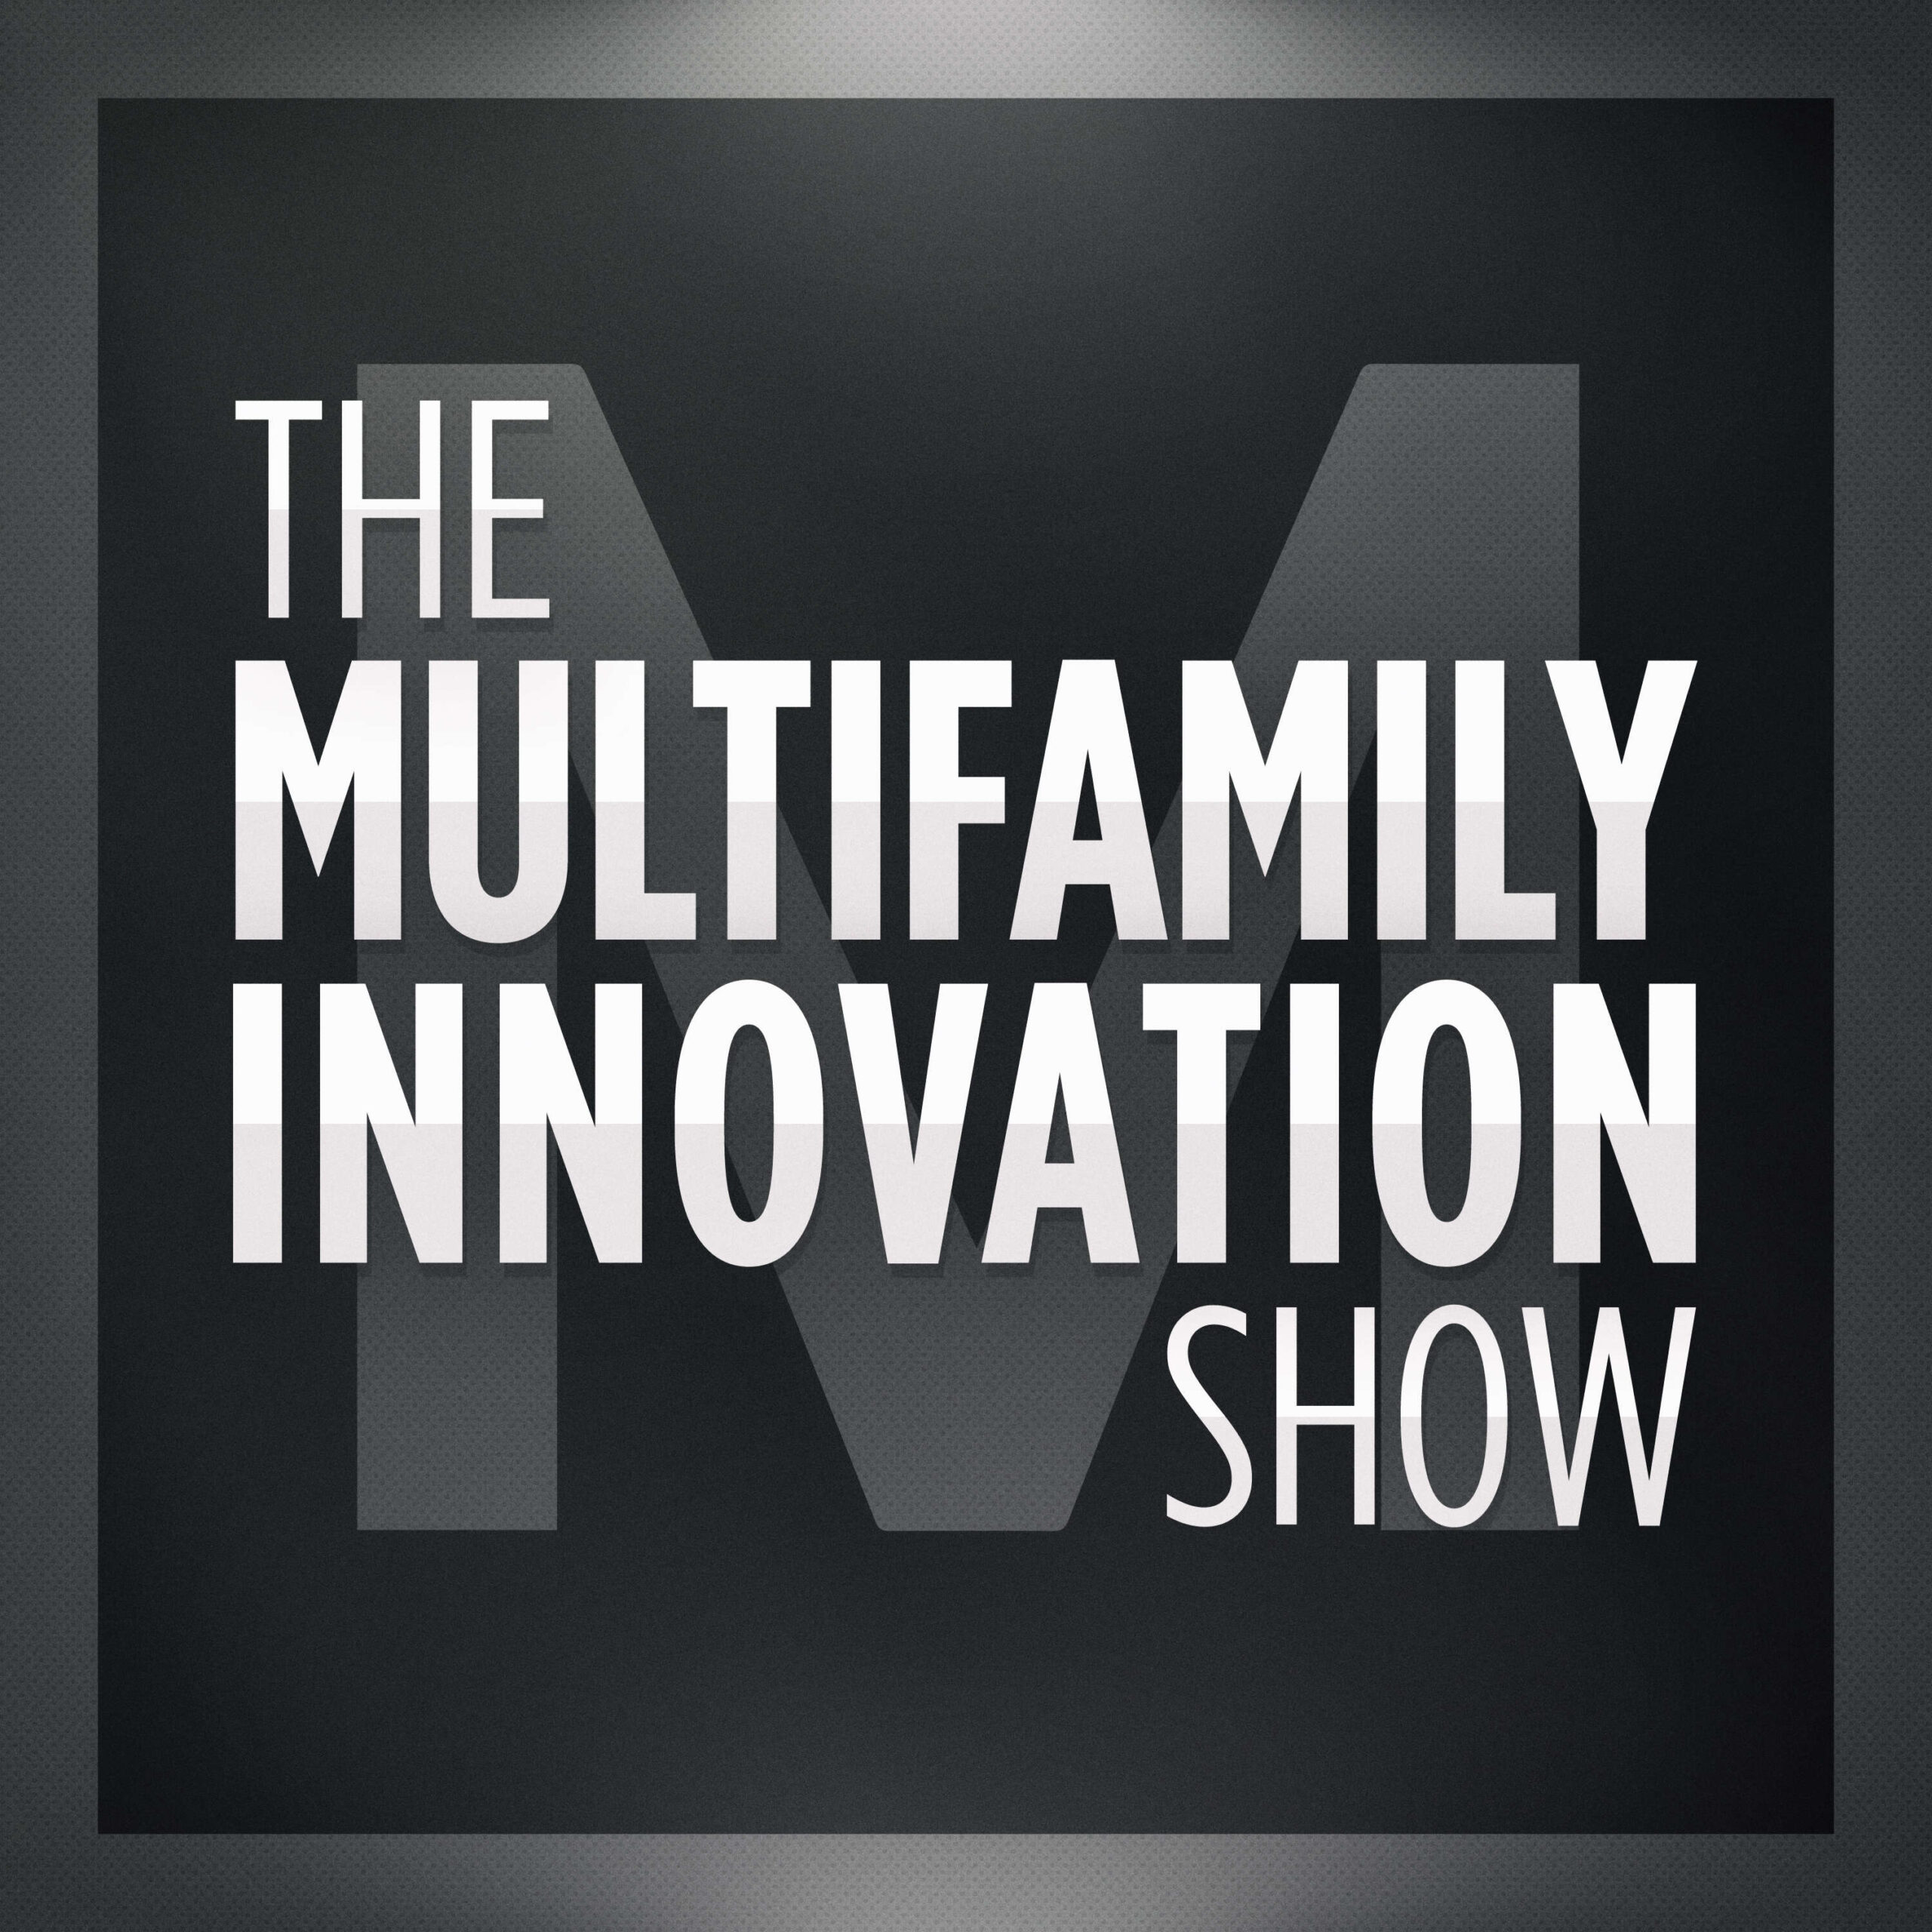 The Journey to Multifamily Investing